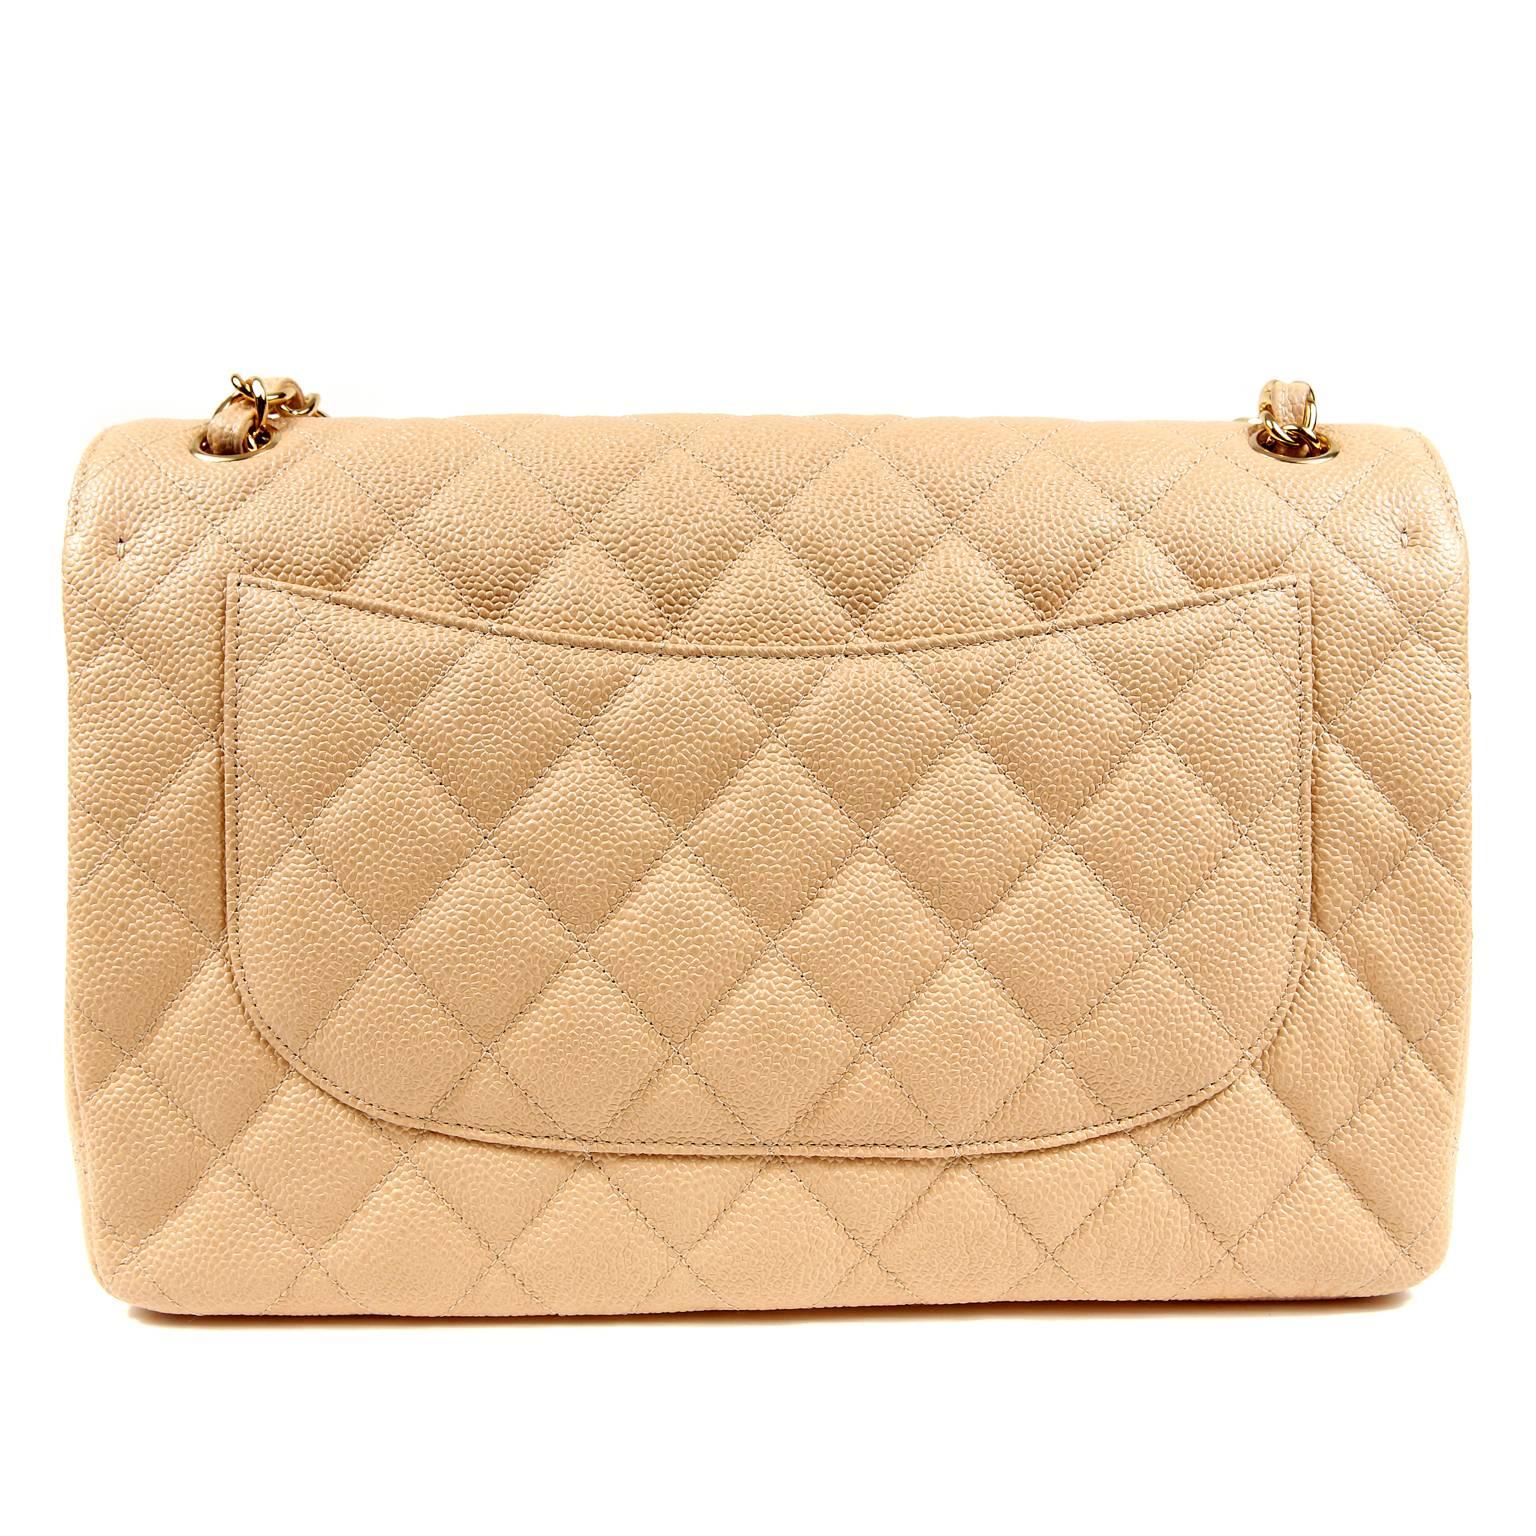 Chanel Beige Caviar Jumbo Classic- PRISTINE
Part of the Timeless Classics collection, this piece is certain to hold its value. 

Rich beige caviar leather is quilted in signature Chanel diamond pattern.  Gold interlocking CC twist lock secures the